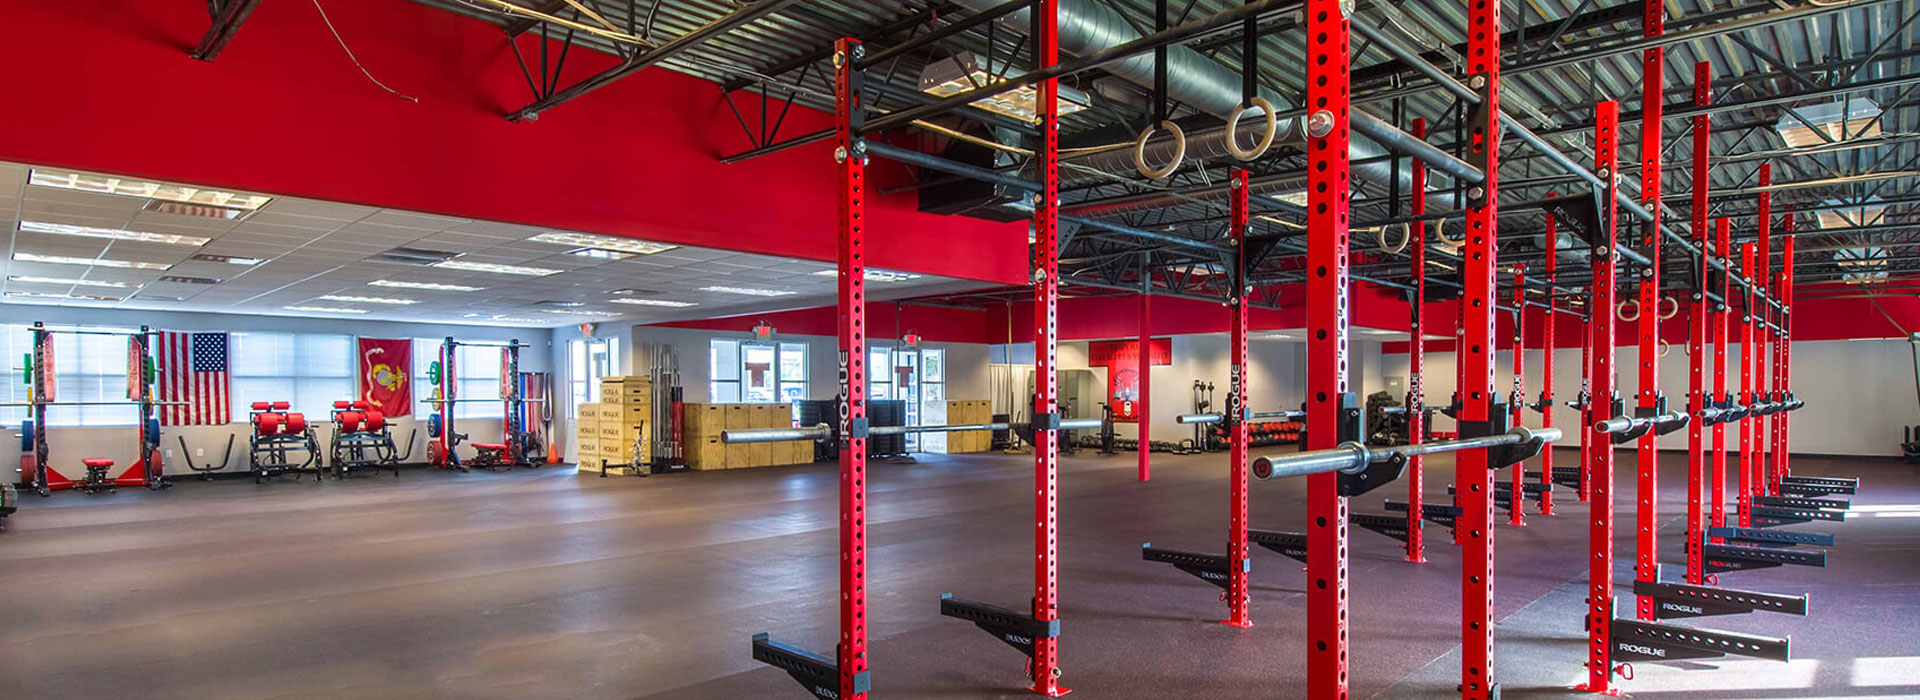 Top 5 Best Gyms To Join In Wesley Chapel, FL